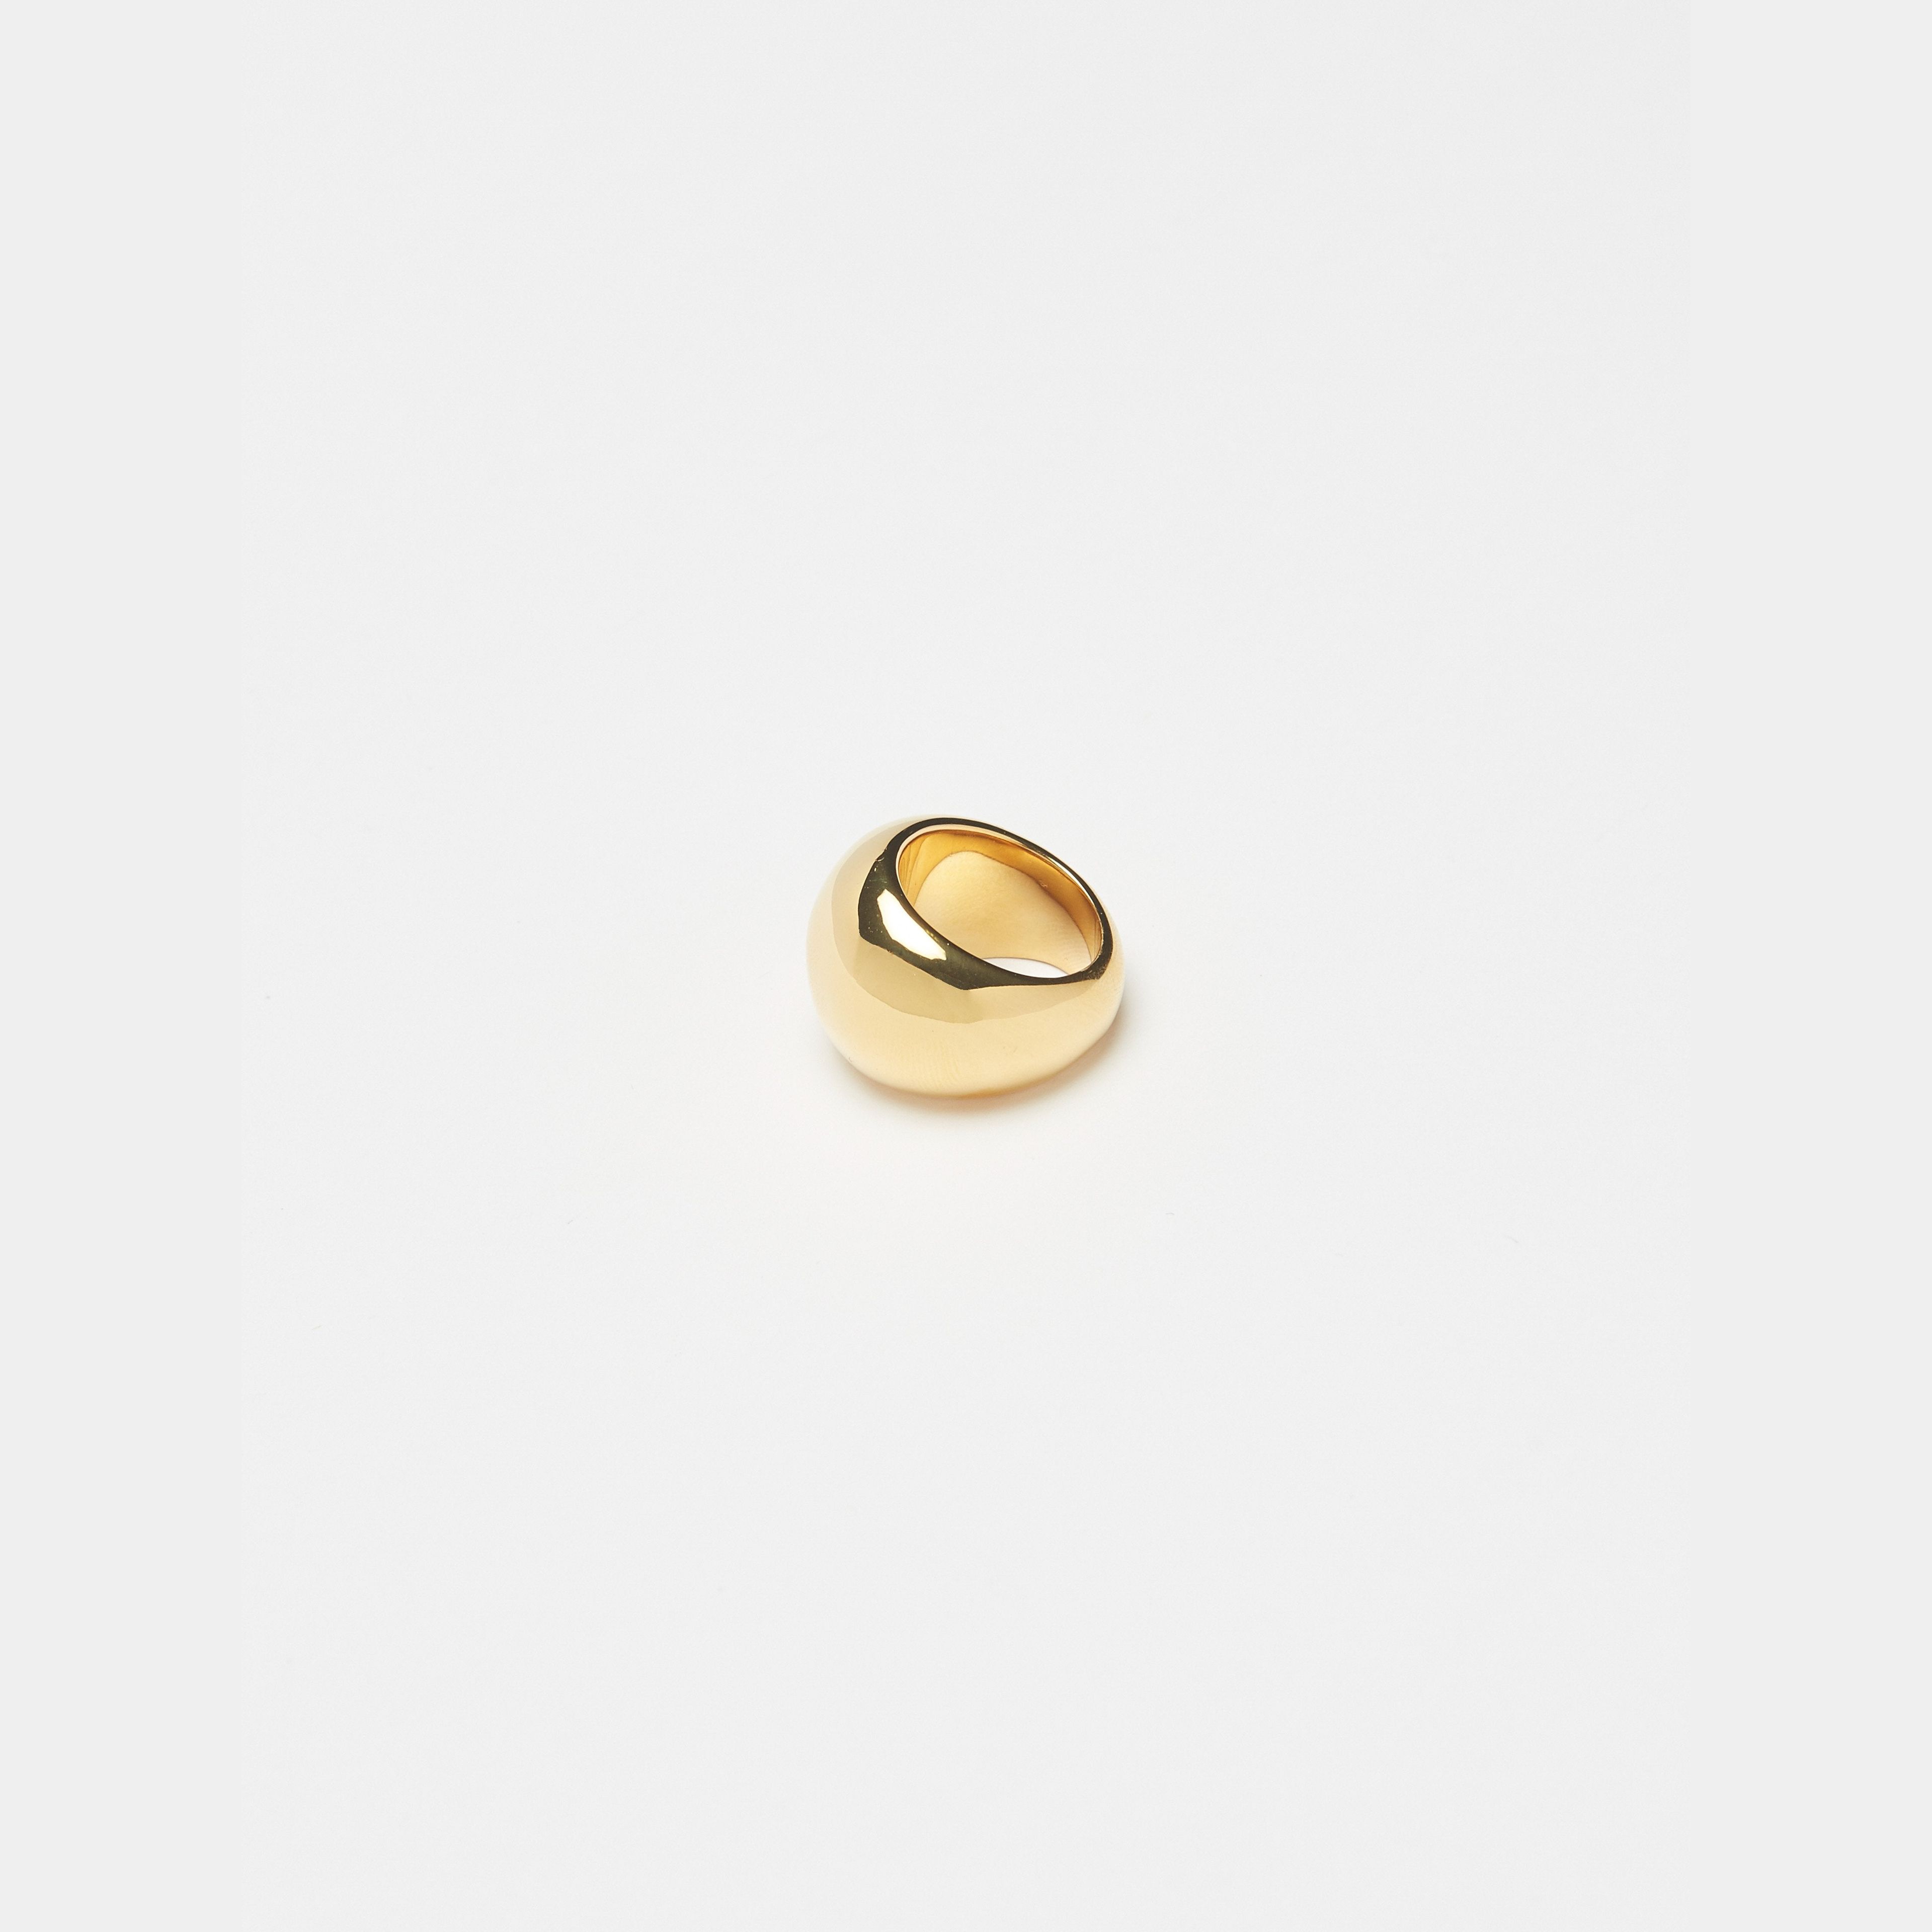 Large Gold Orb Ring